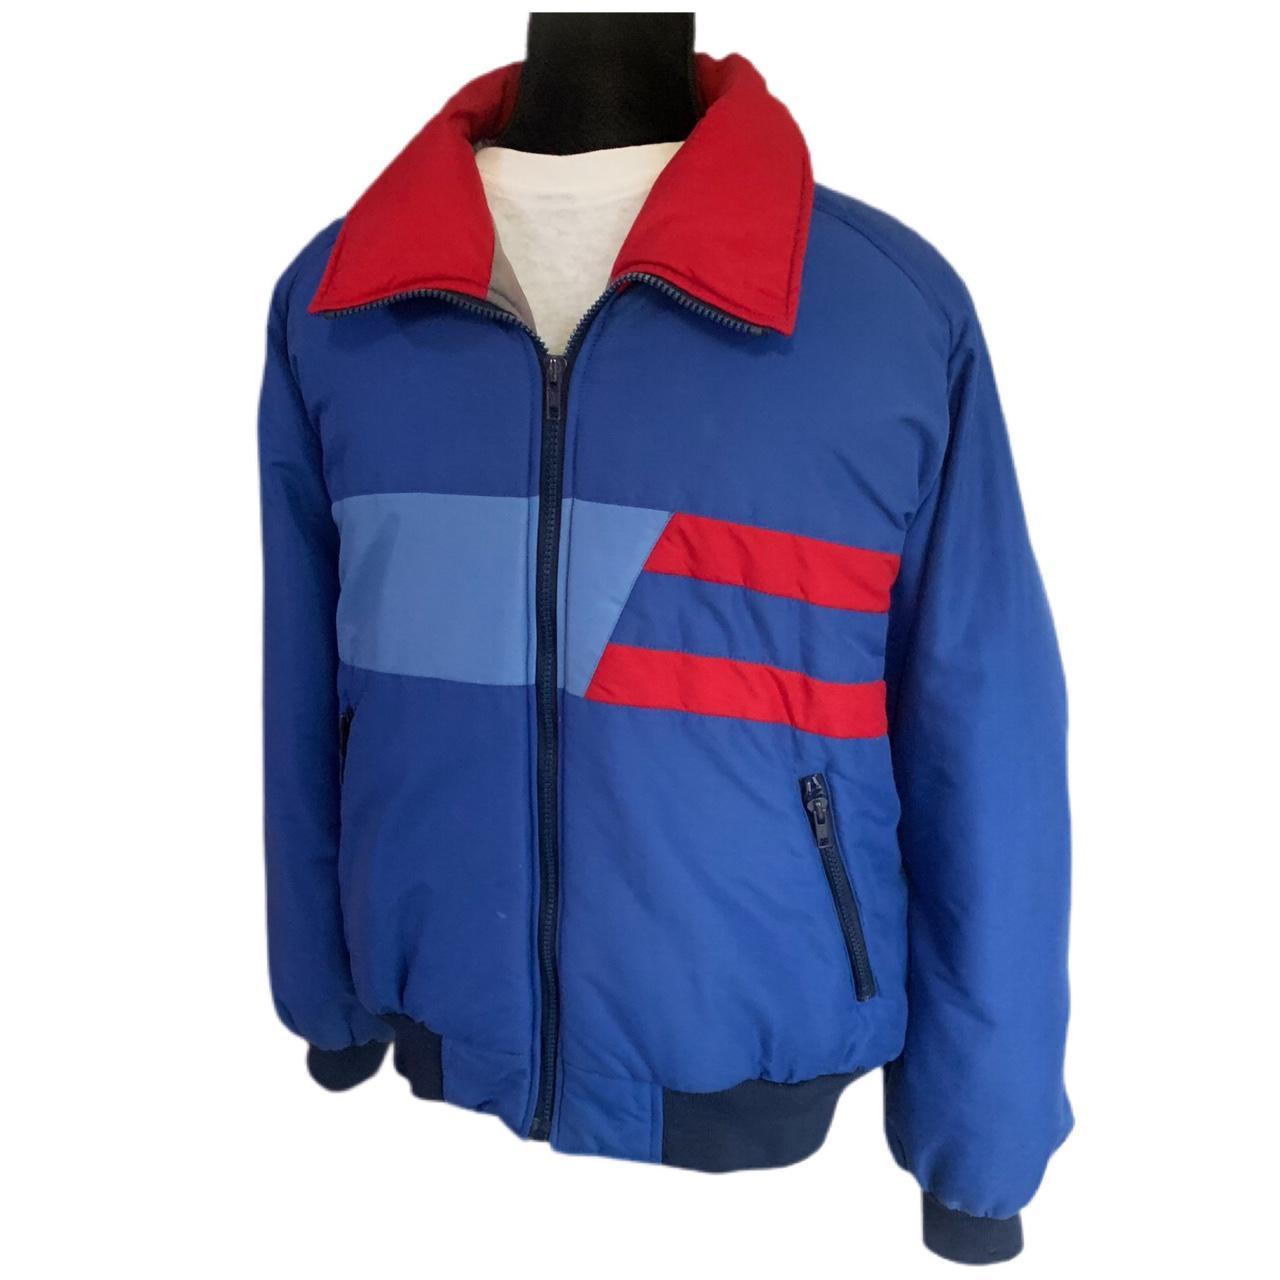 Men's Blue and Red Jacket (2)